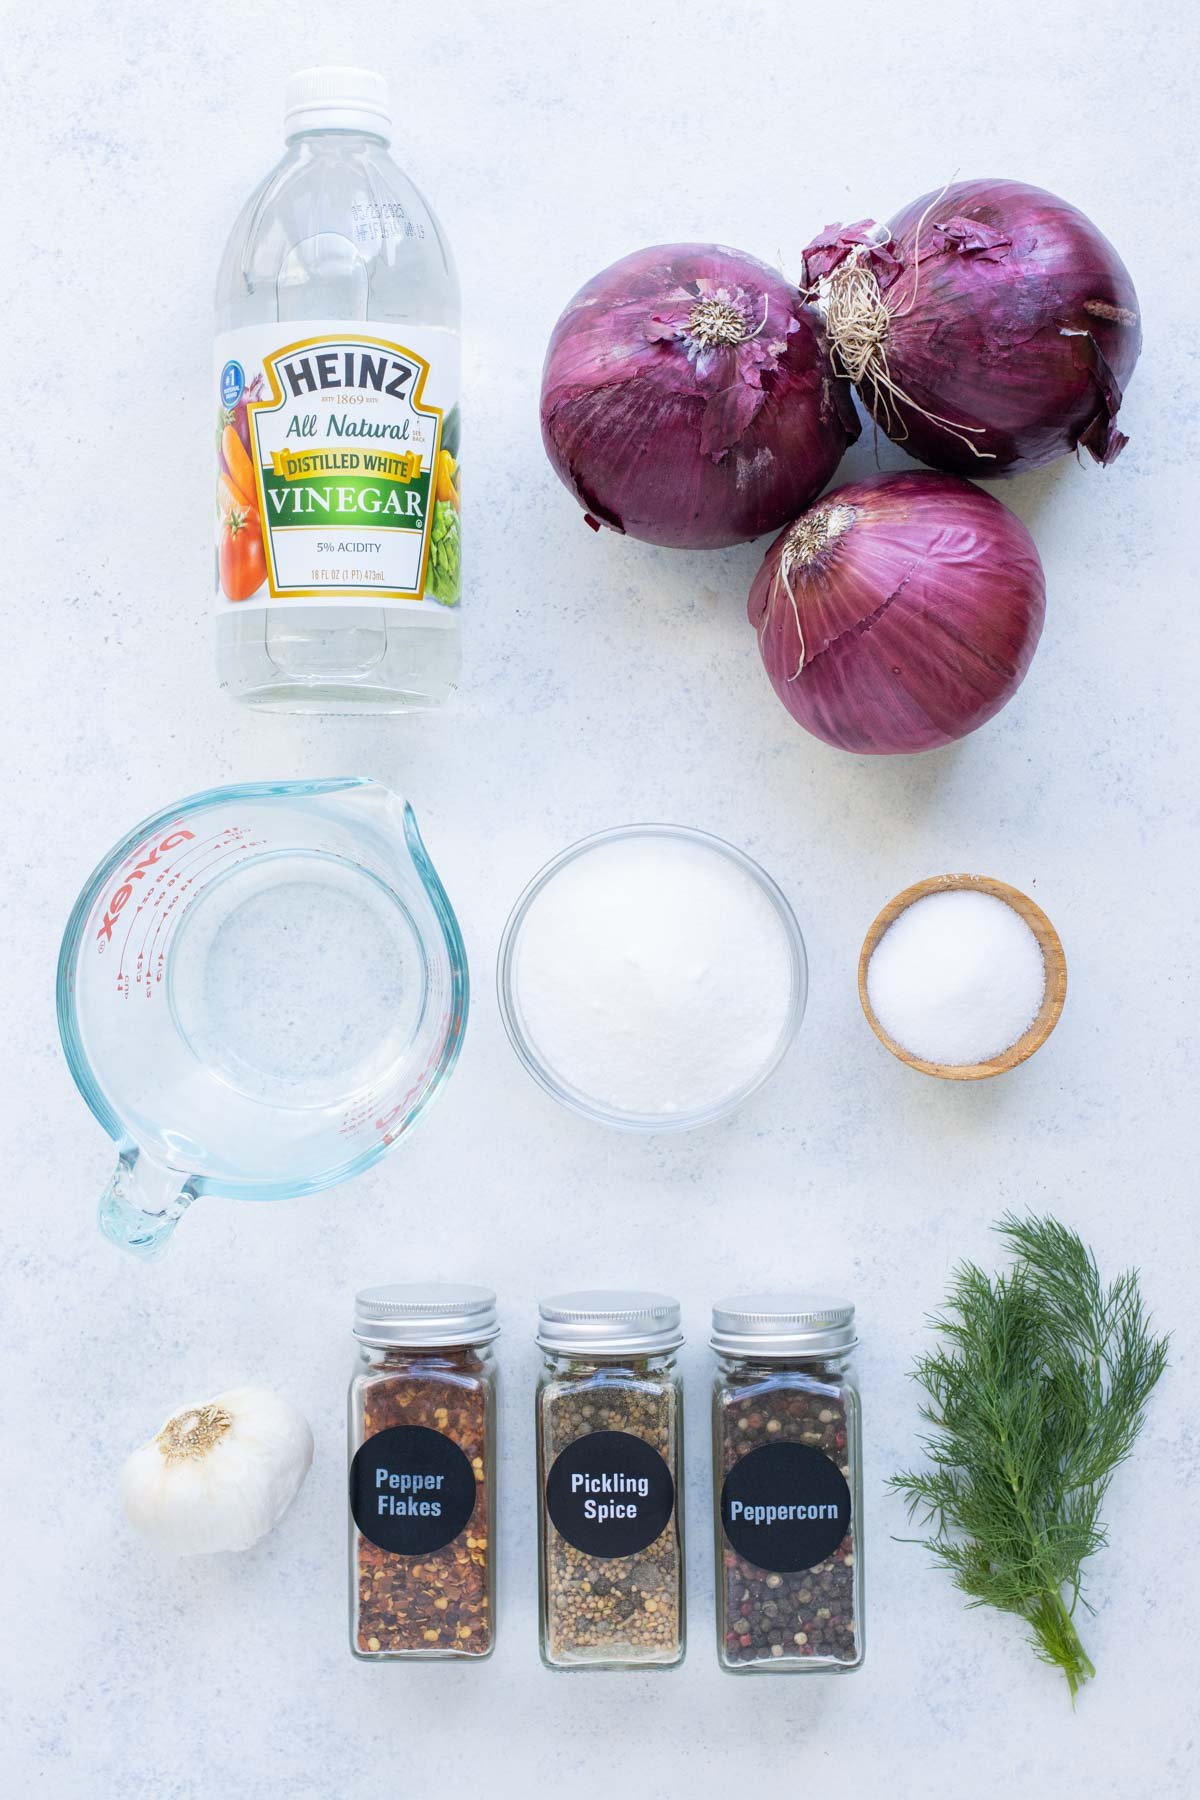 Red onions, vinegar, salt, sugar, and herbs are the ingredients for pickled red onions.